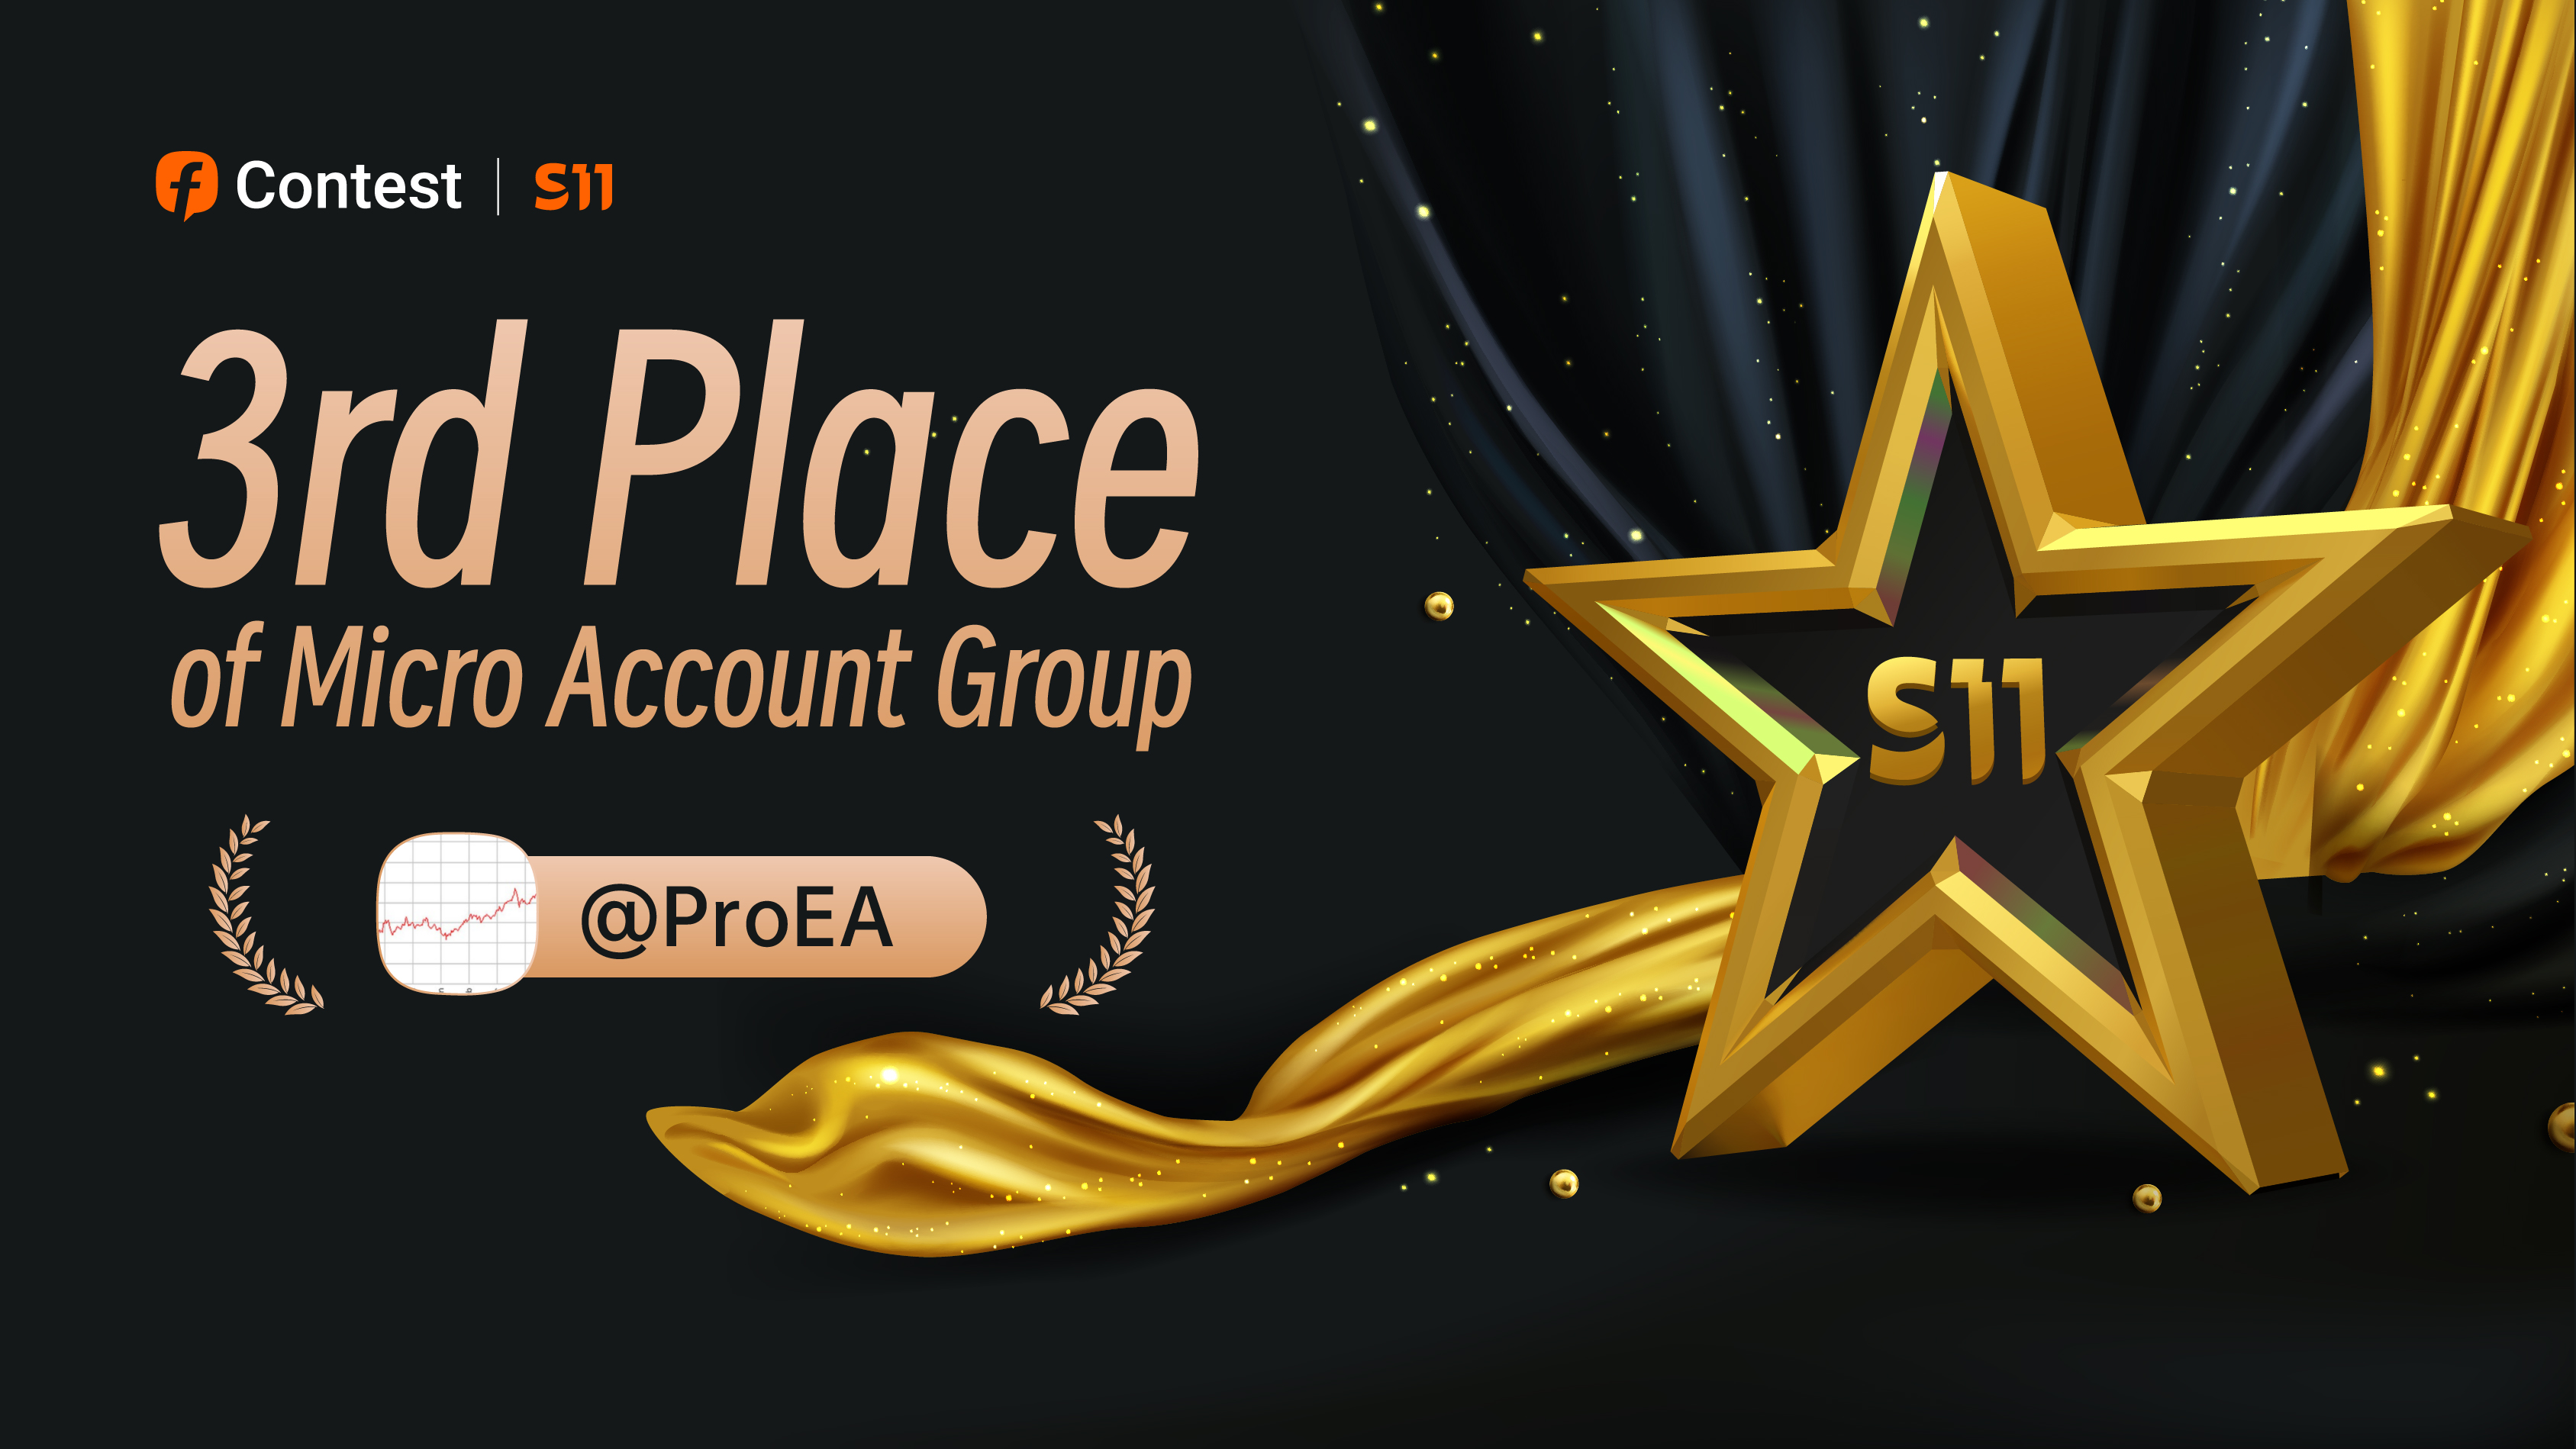 3rd Place of the Micro Account Group, @ProEA